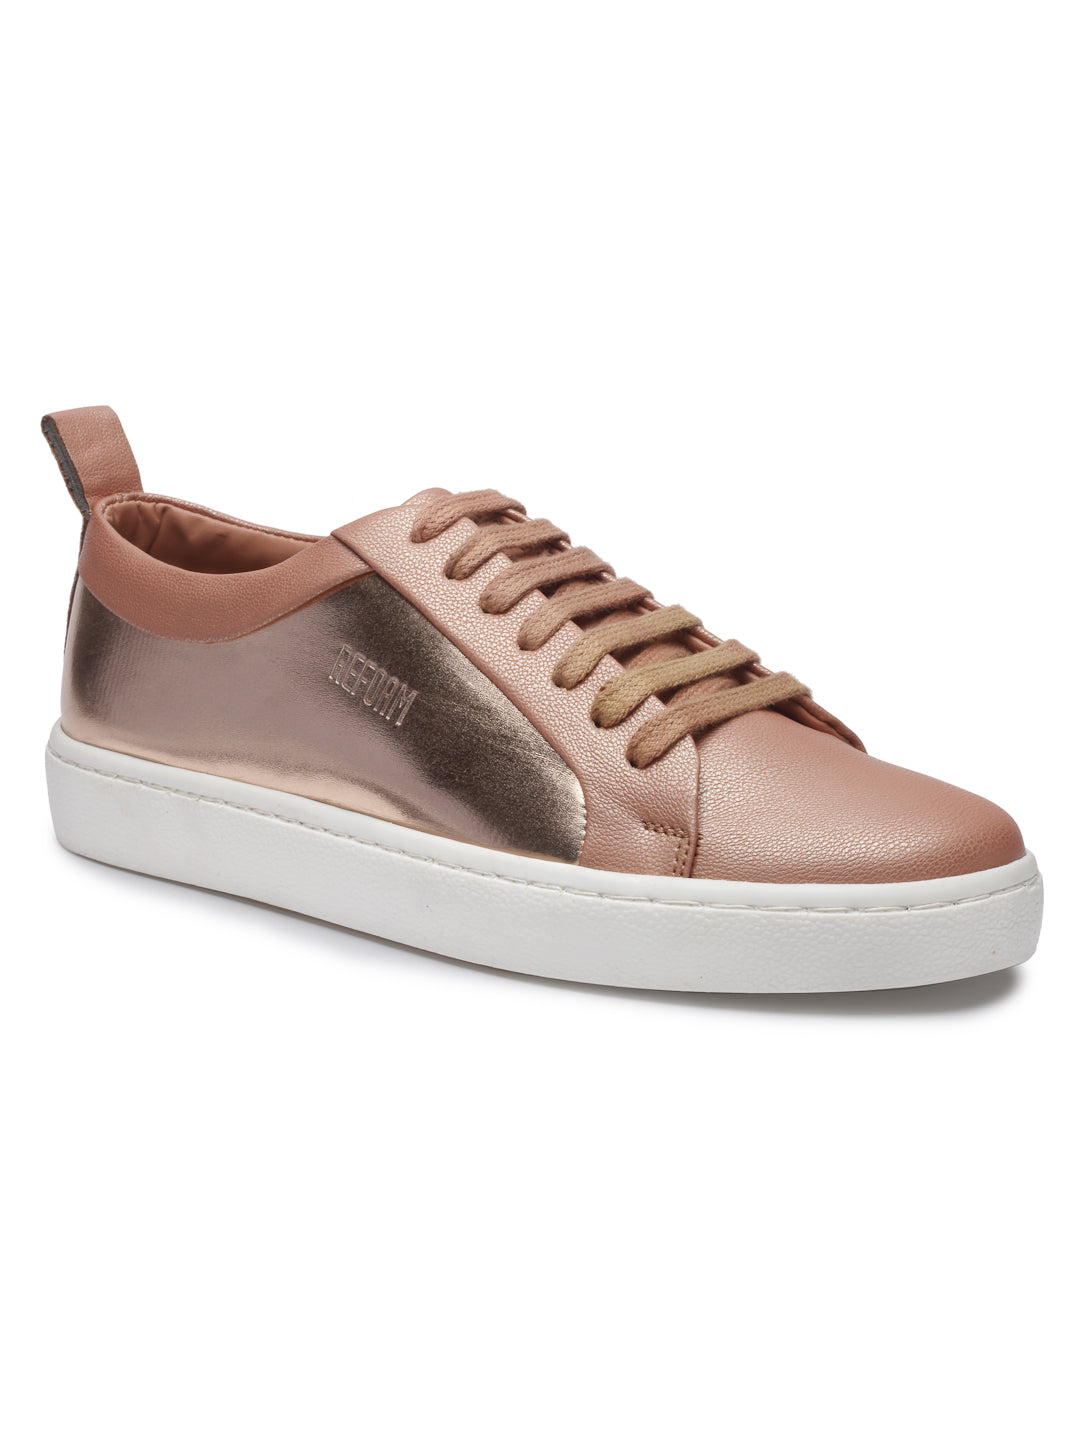 Synthetic Leather Lace up Casual Sneaker